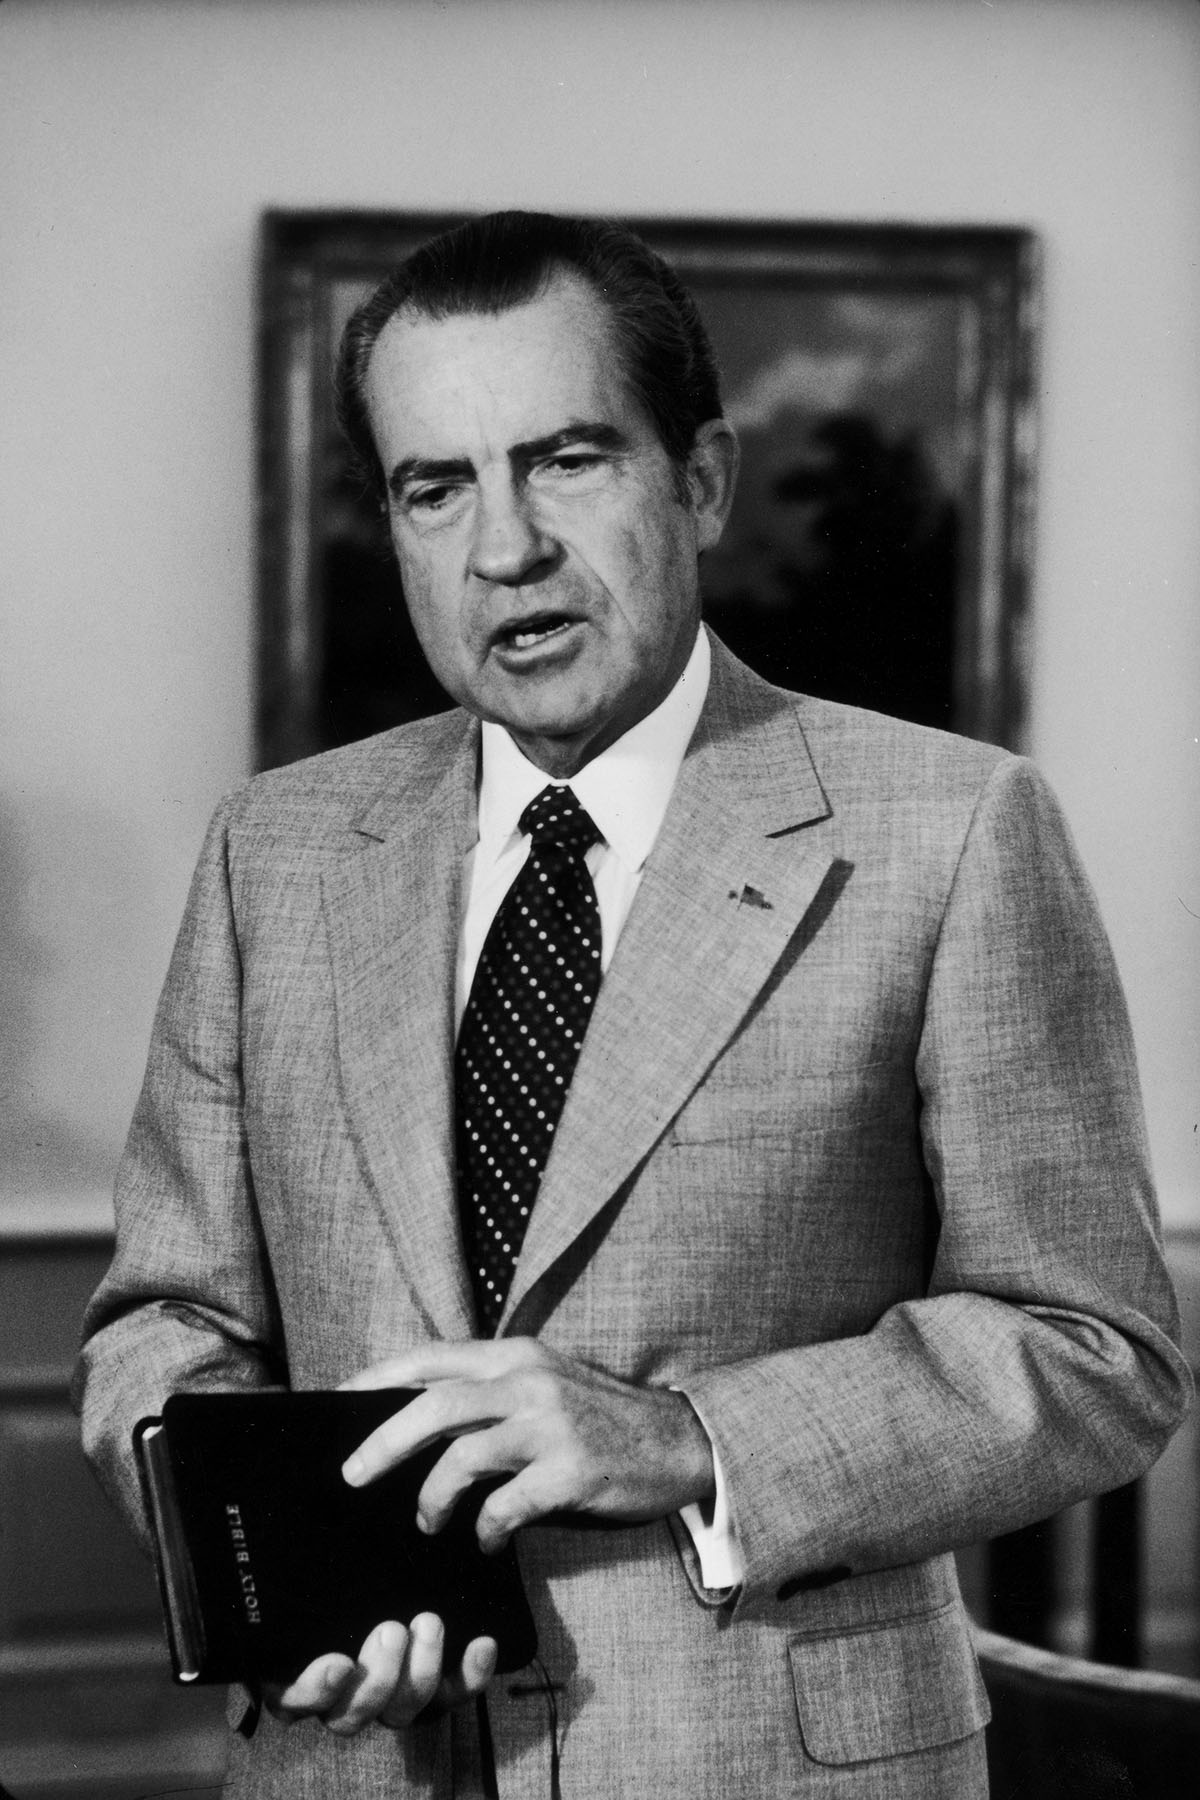 President Richard Nixon holds a bible at a swearing in ceremony.